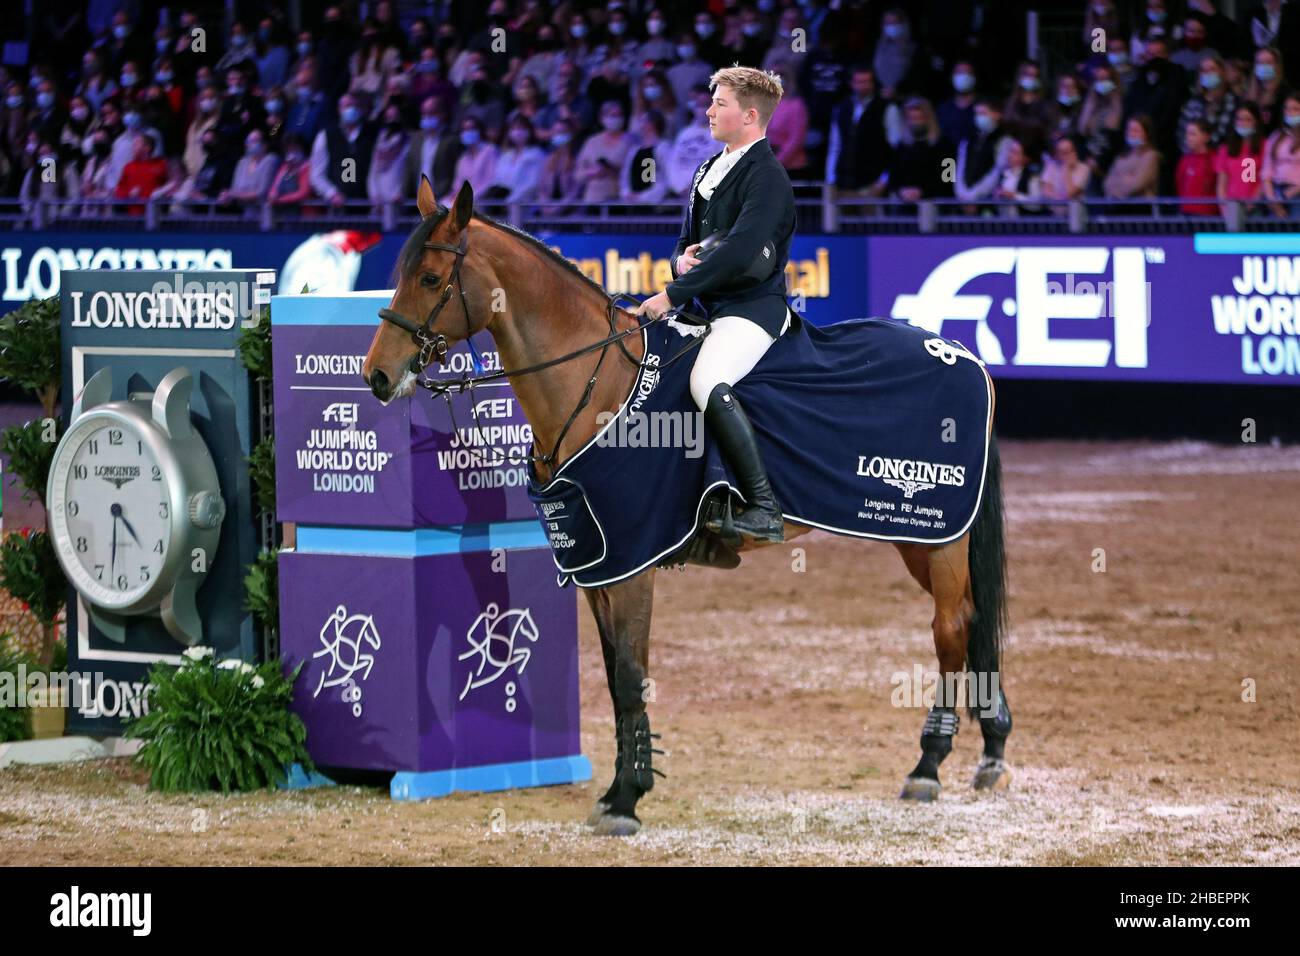 19th December 2021; Royal Docks, Newham, East London, England; The London International Horse Show, Sunday 19th December: The Longines FEI Jumping World Cup; Harry Charles riding Stardust wins The Longines FEI Jumping World Cup Stock Photo